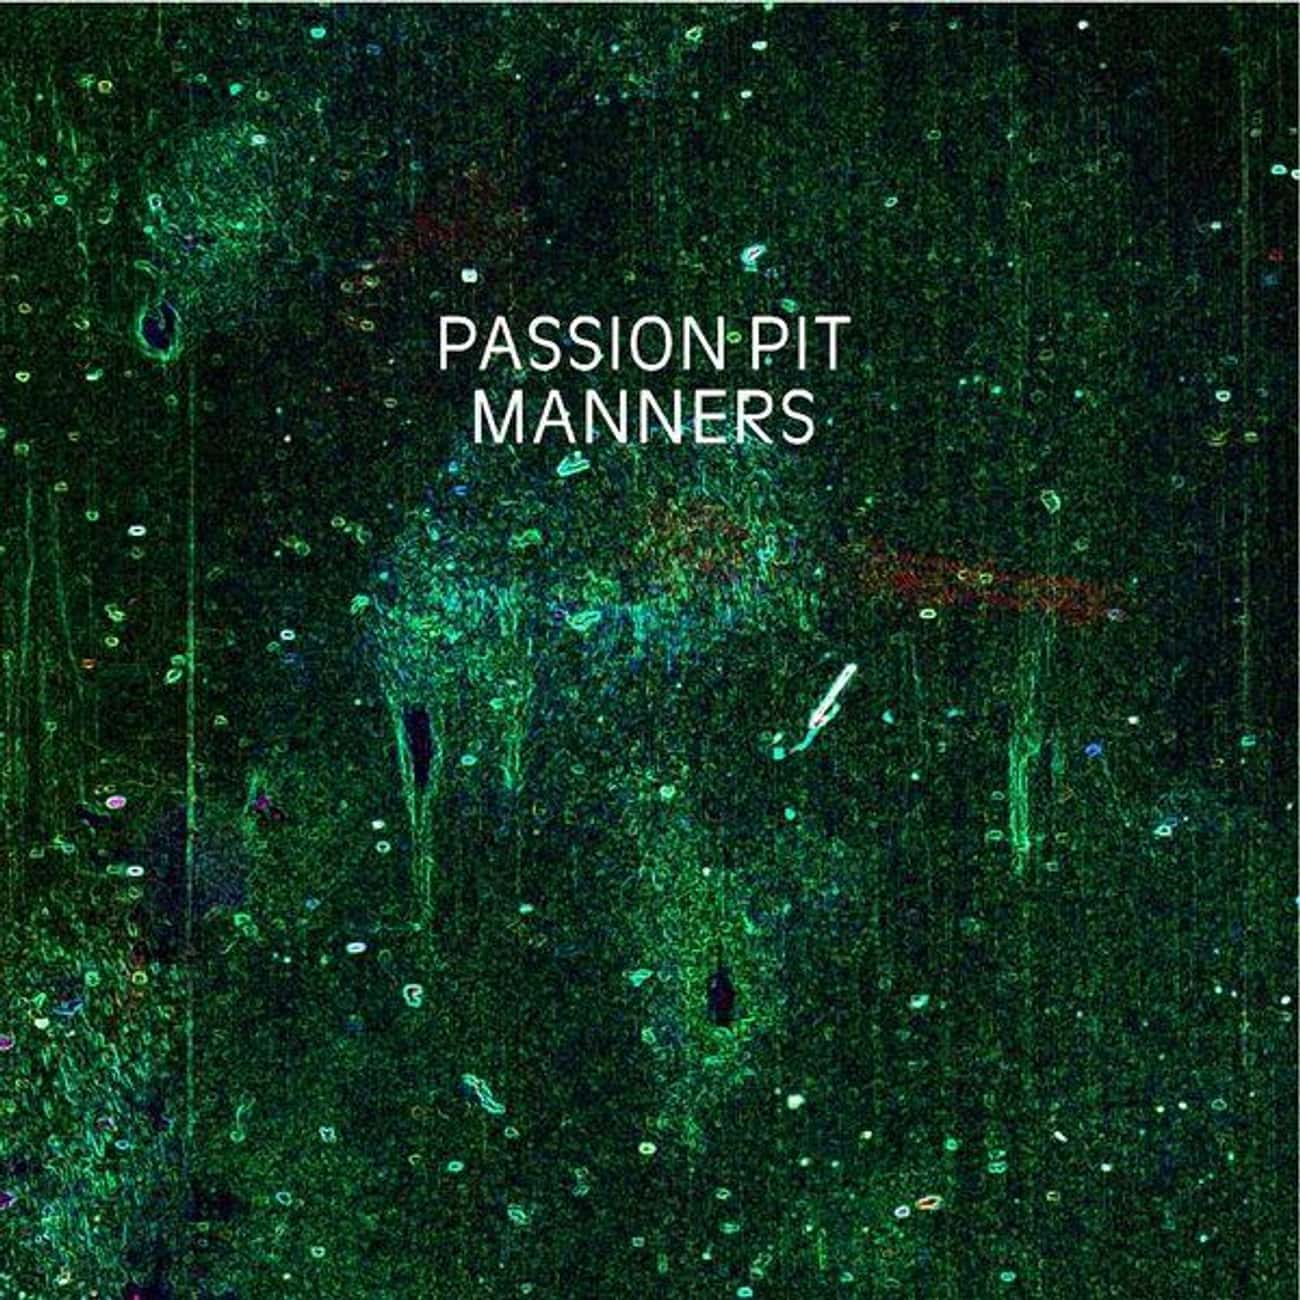 Ranking All 4 Passion Pit Albums Best To Worst